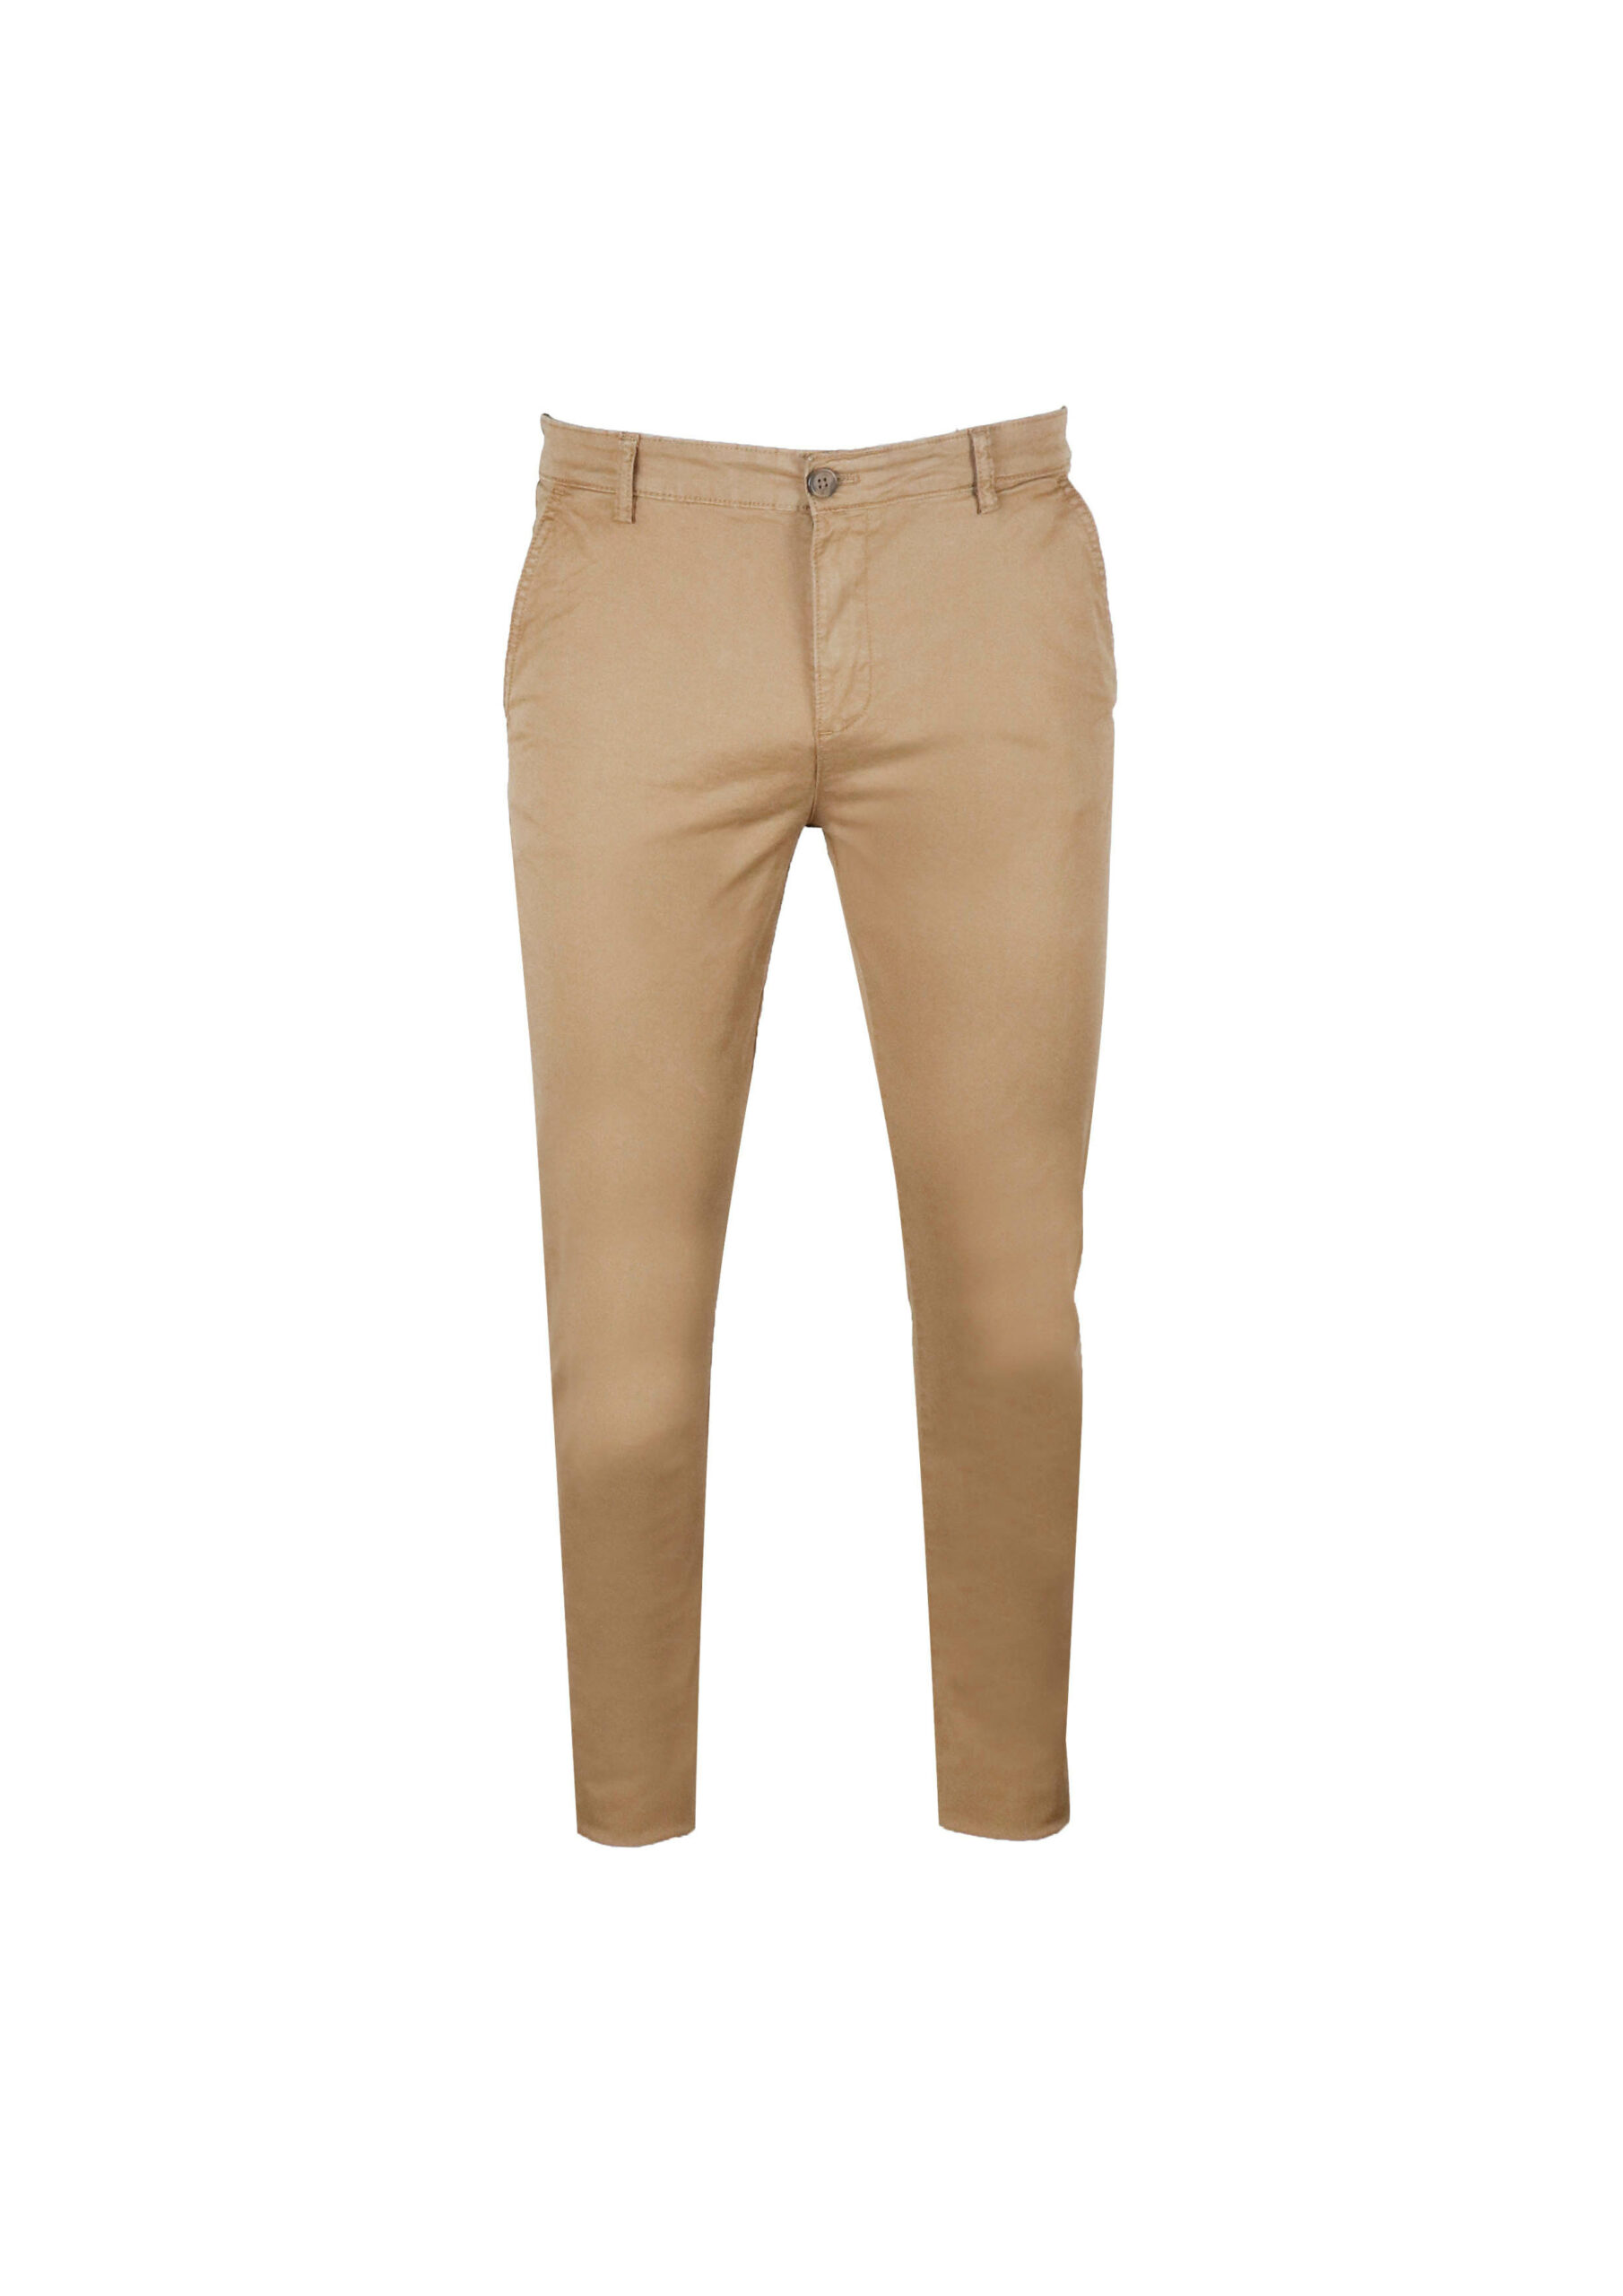 Men's Twill Pant - Artisan Outfitters Ltd